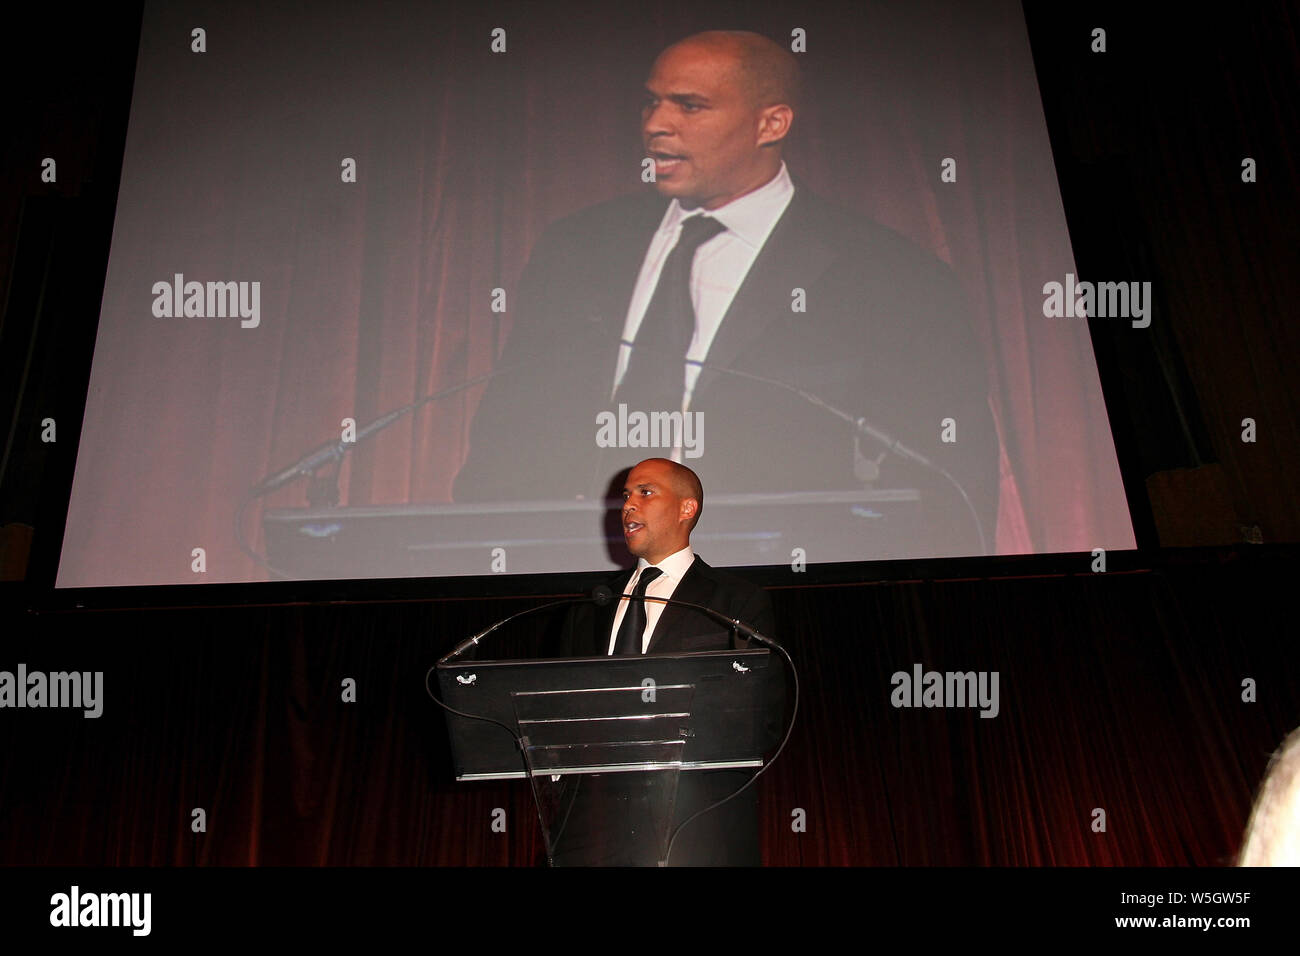 New York, USA. 12 May, 2008. Cory A. Booker at the Harvard Business School Club of New York's 41st annual Leadership Dinner at Cipriani 42nd Street. Credit: Steve Mack/Alamy Stock Photo